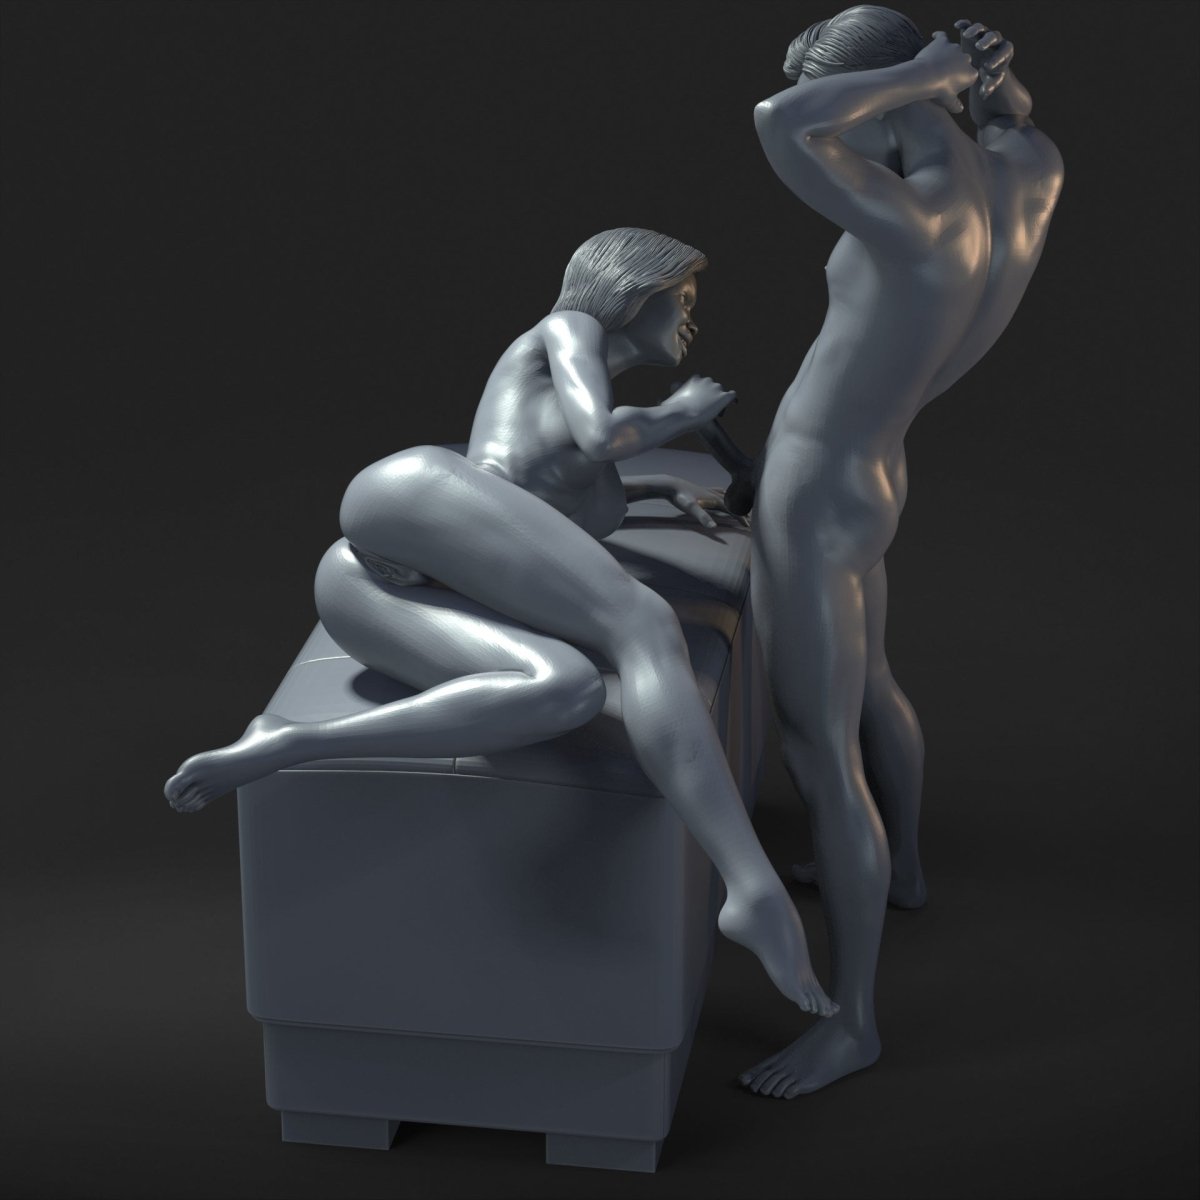 Couple 24 Mature 3d Printed miniature FanArt by Masters Of Prints Collectables Statues & Figurines